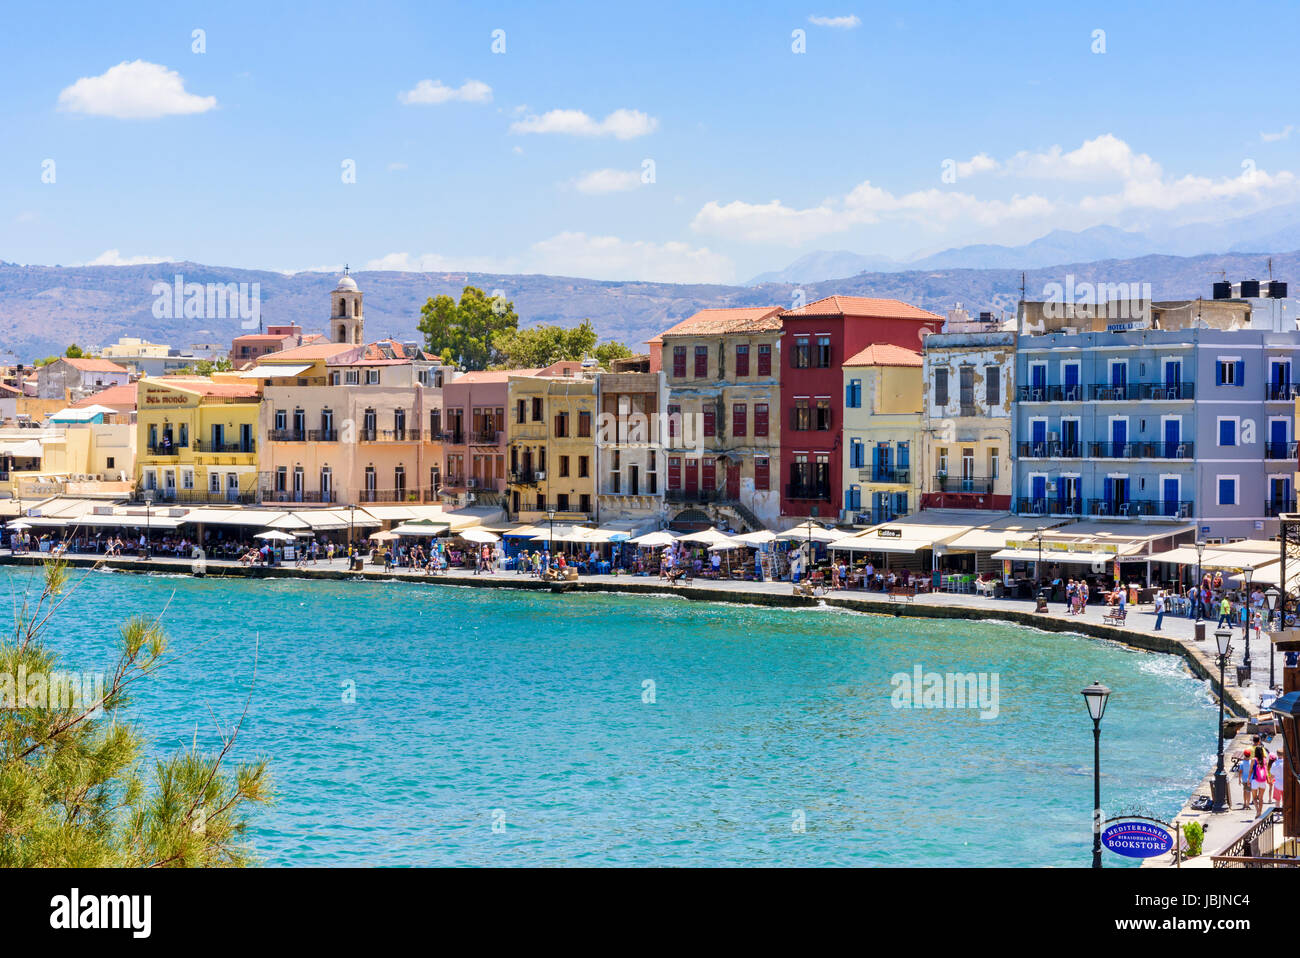 The Venetian harbour of Chania surrounded by cafés and restaurants along the waterfront promenade, Hania, Crete, Greece Stock Photo